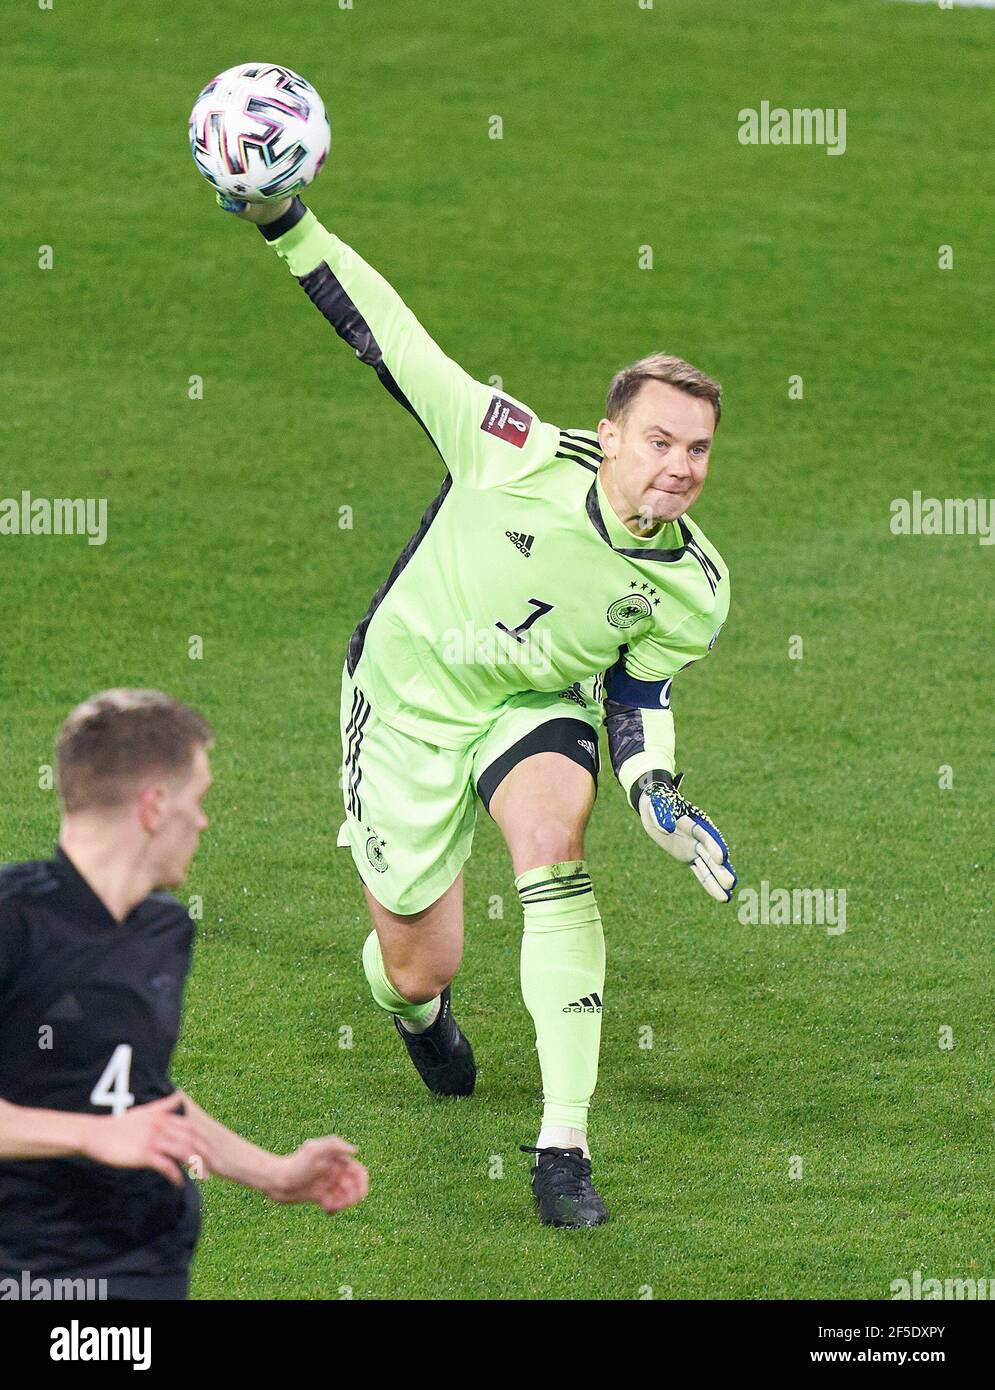 Manuel NEUER, DFB 1 goalkeeper, abwurf, ball in the match GERMANY - ICELAND  Deutschland - ISLAND Qualification for World Championships, WM Quali,  Season 2020/2021, March 25, 2021 in Duisburg, Germany. © Peter